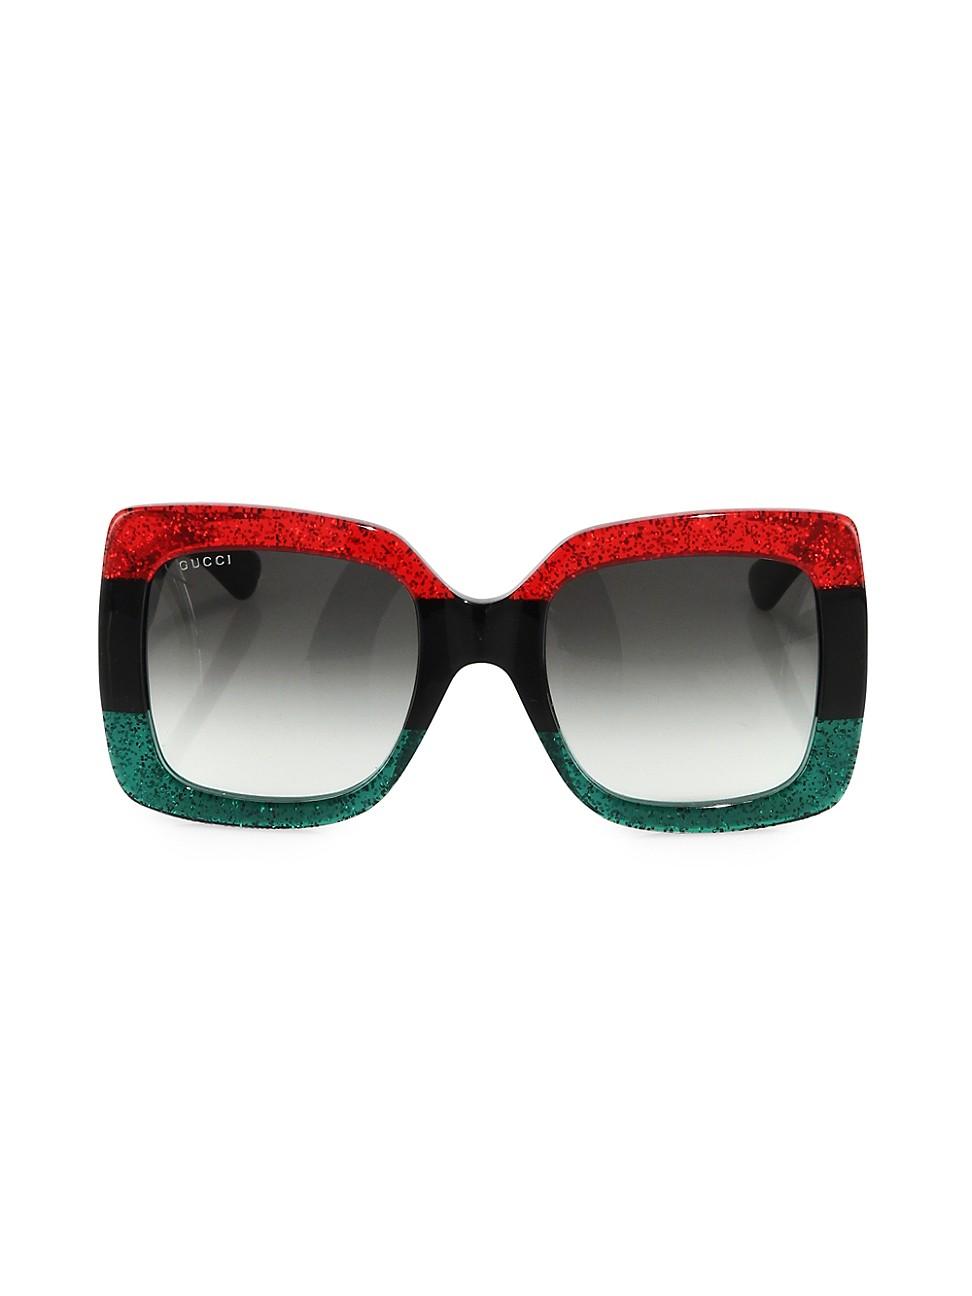 gucci glasses green and red